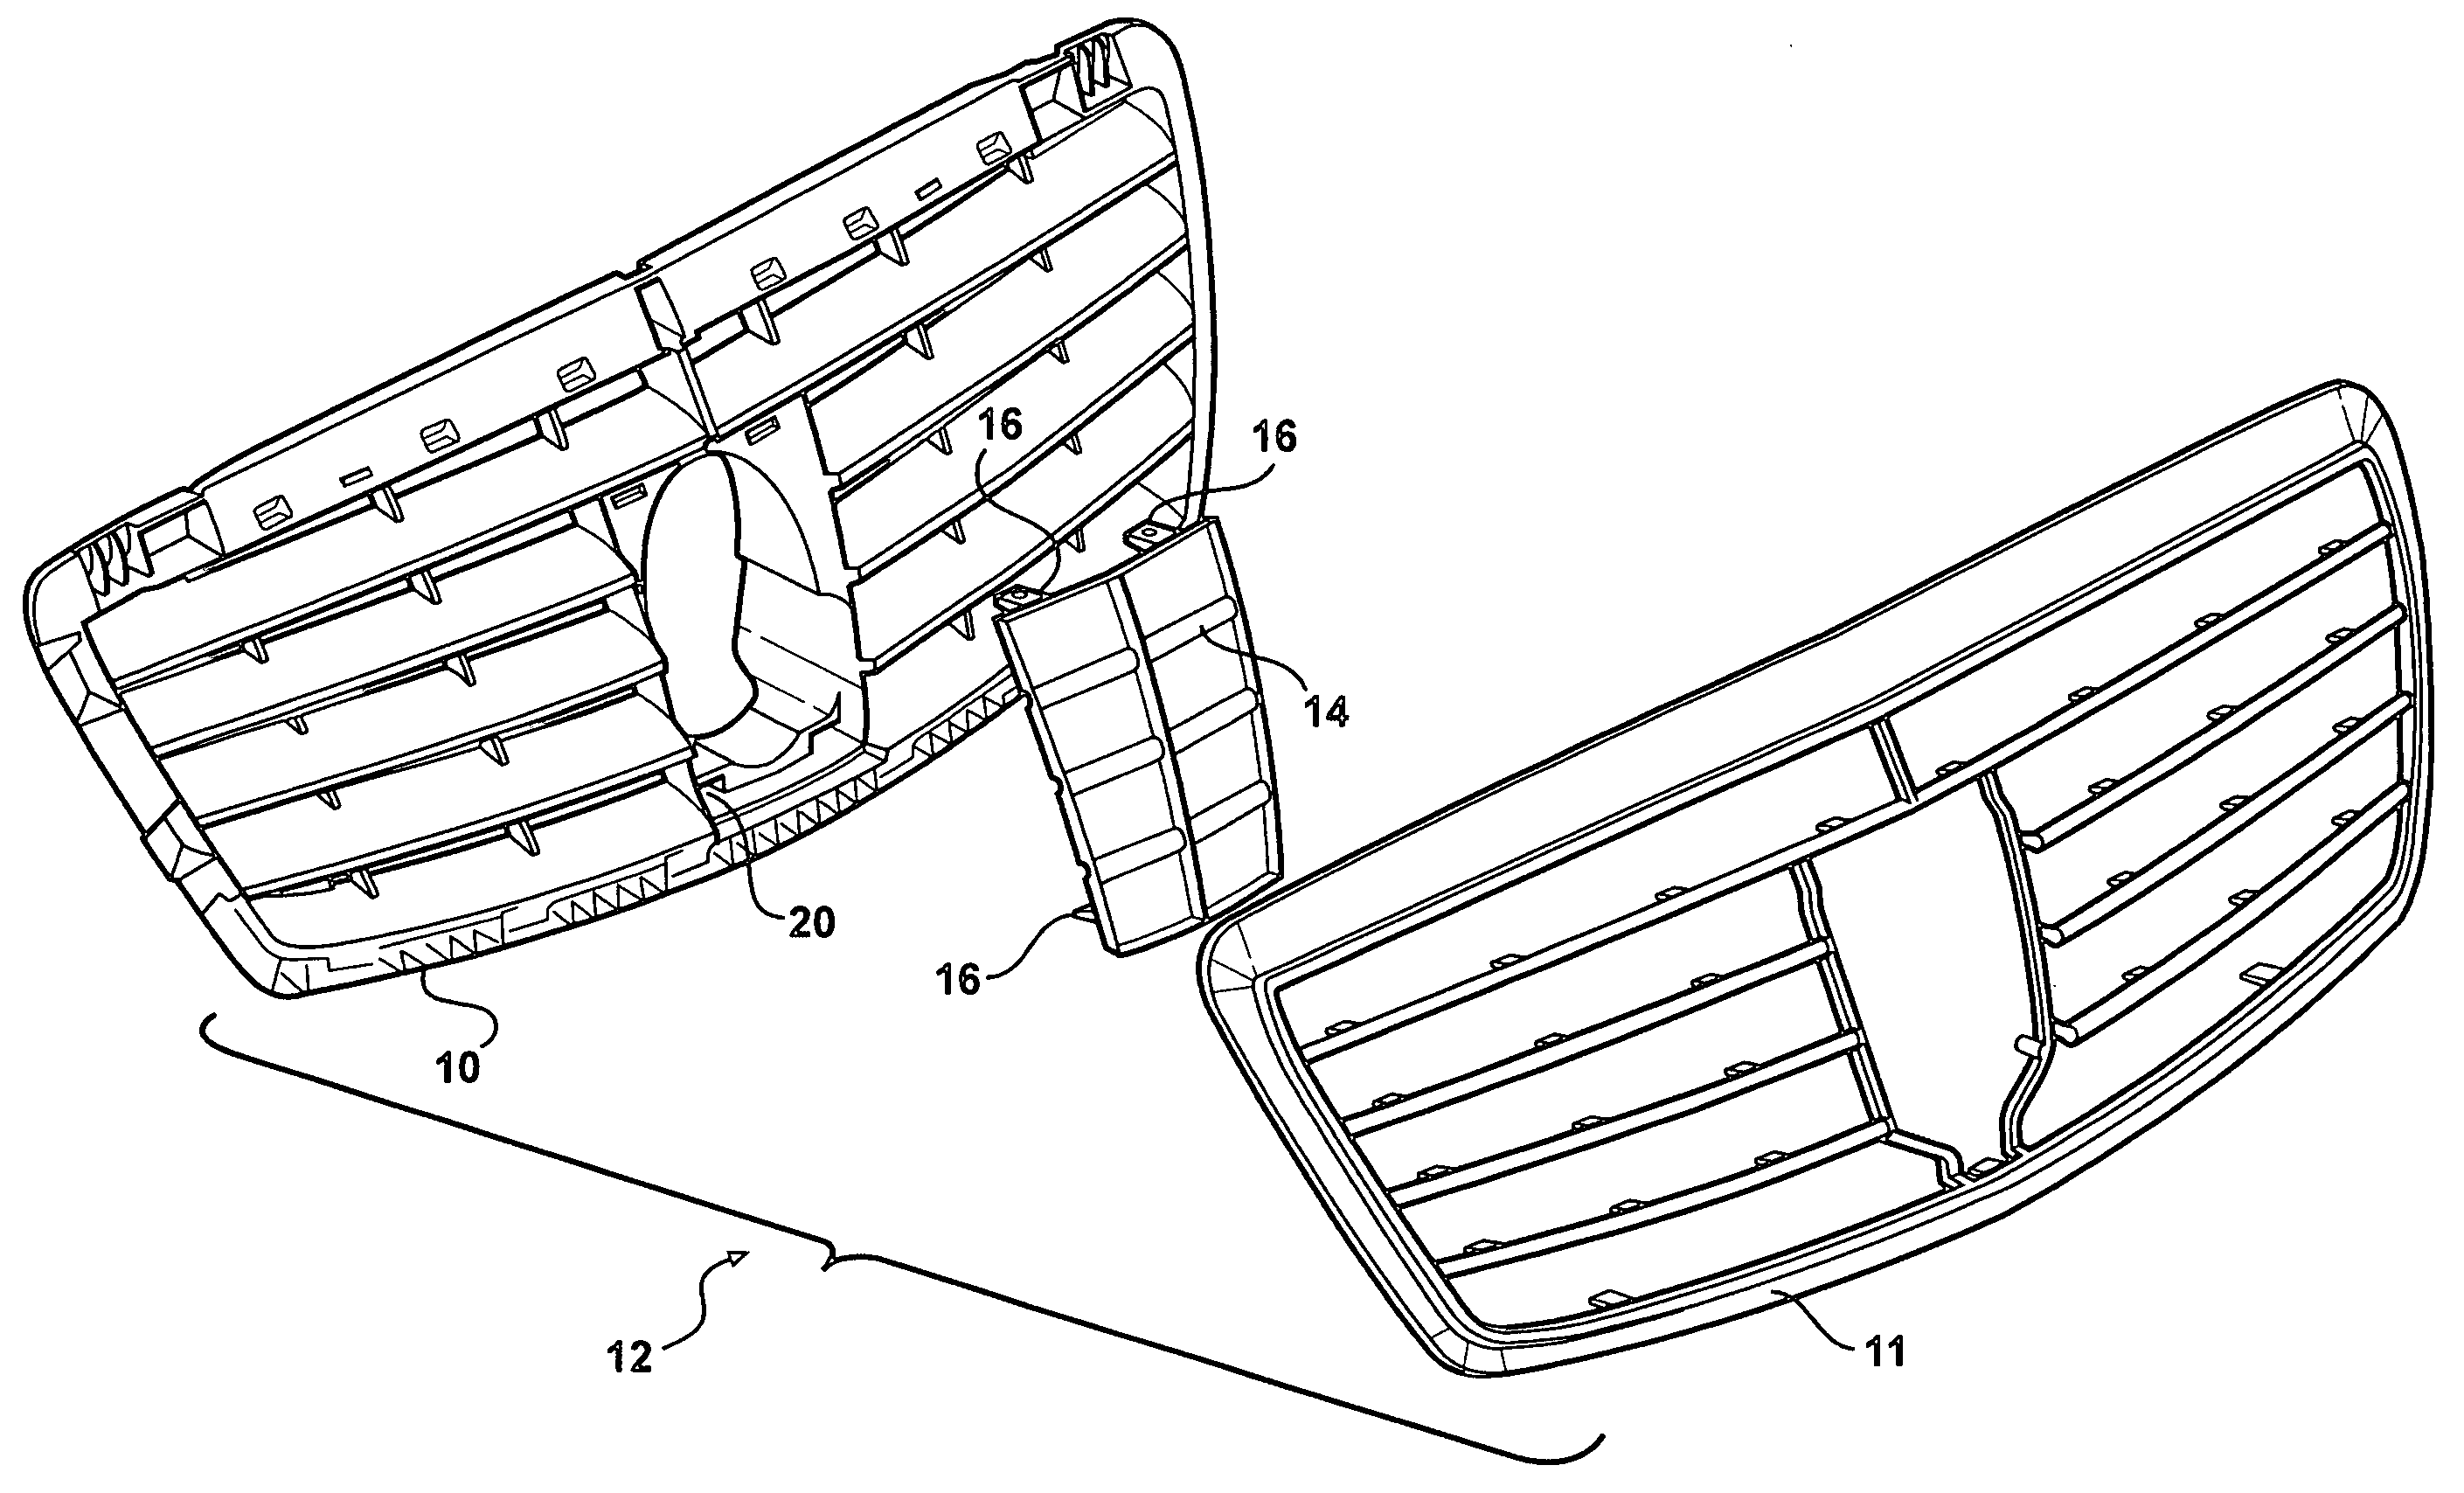 Method of fixing components